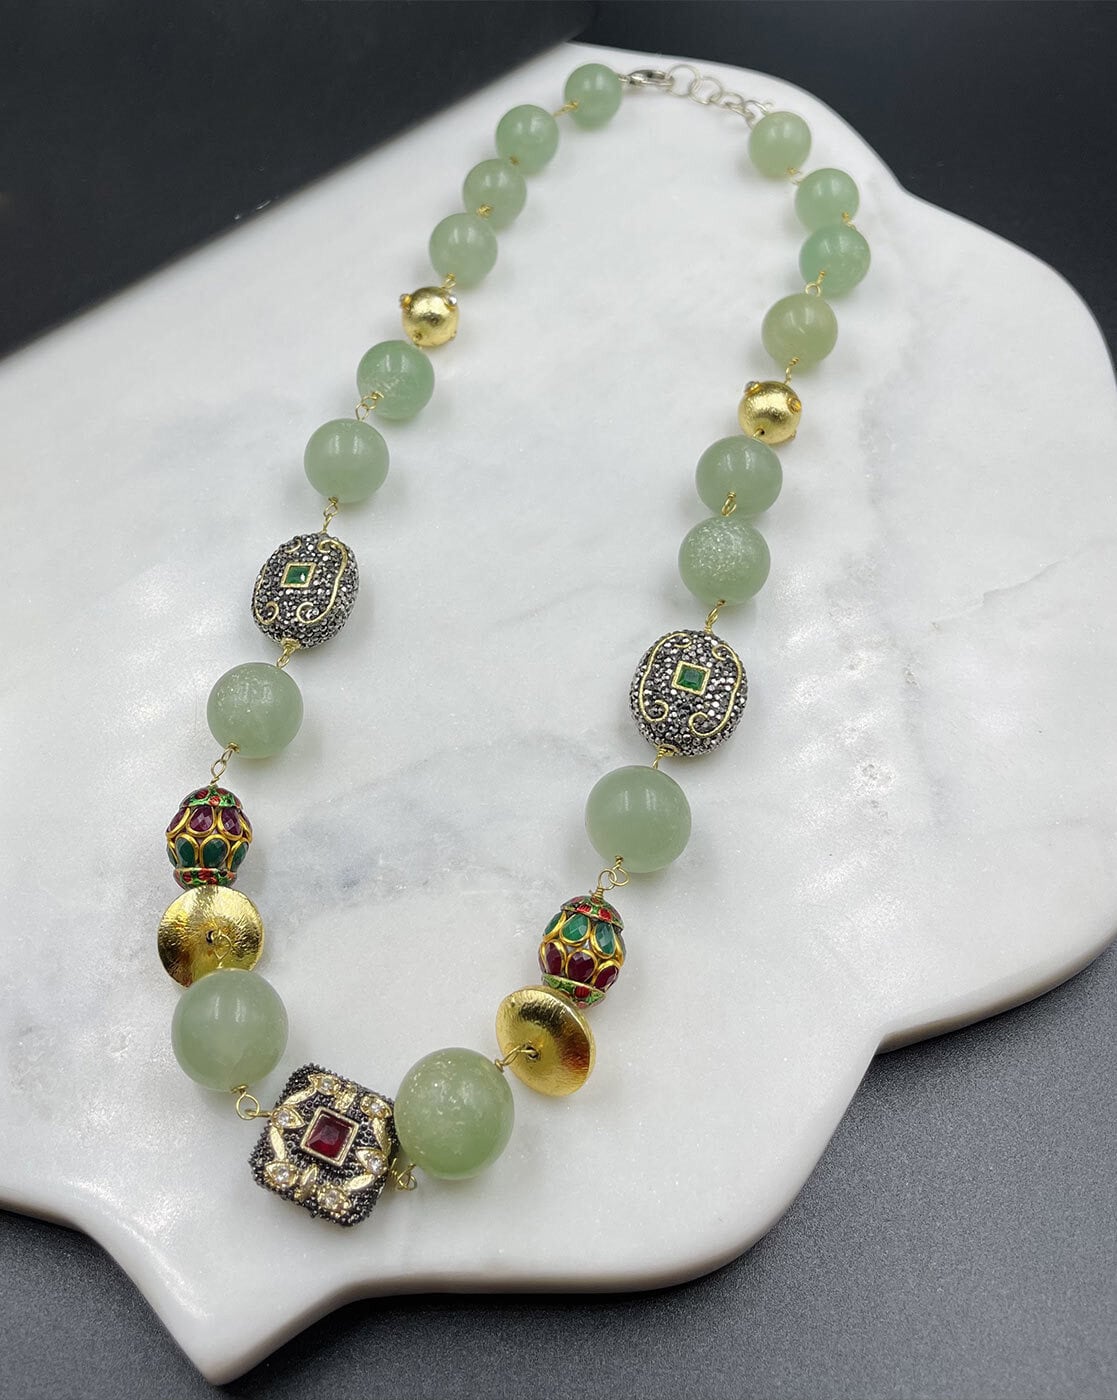 Natural Jade and Gold Bead Necklace